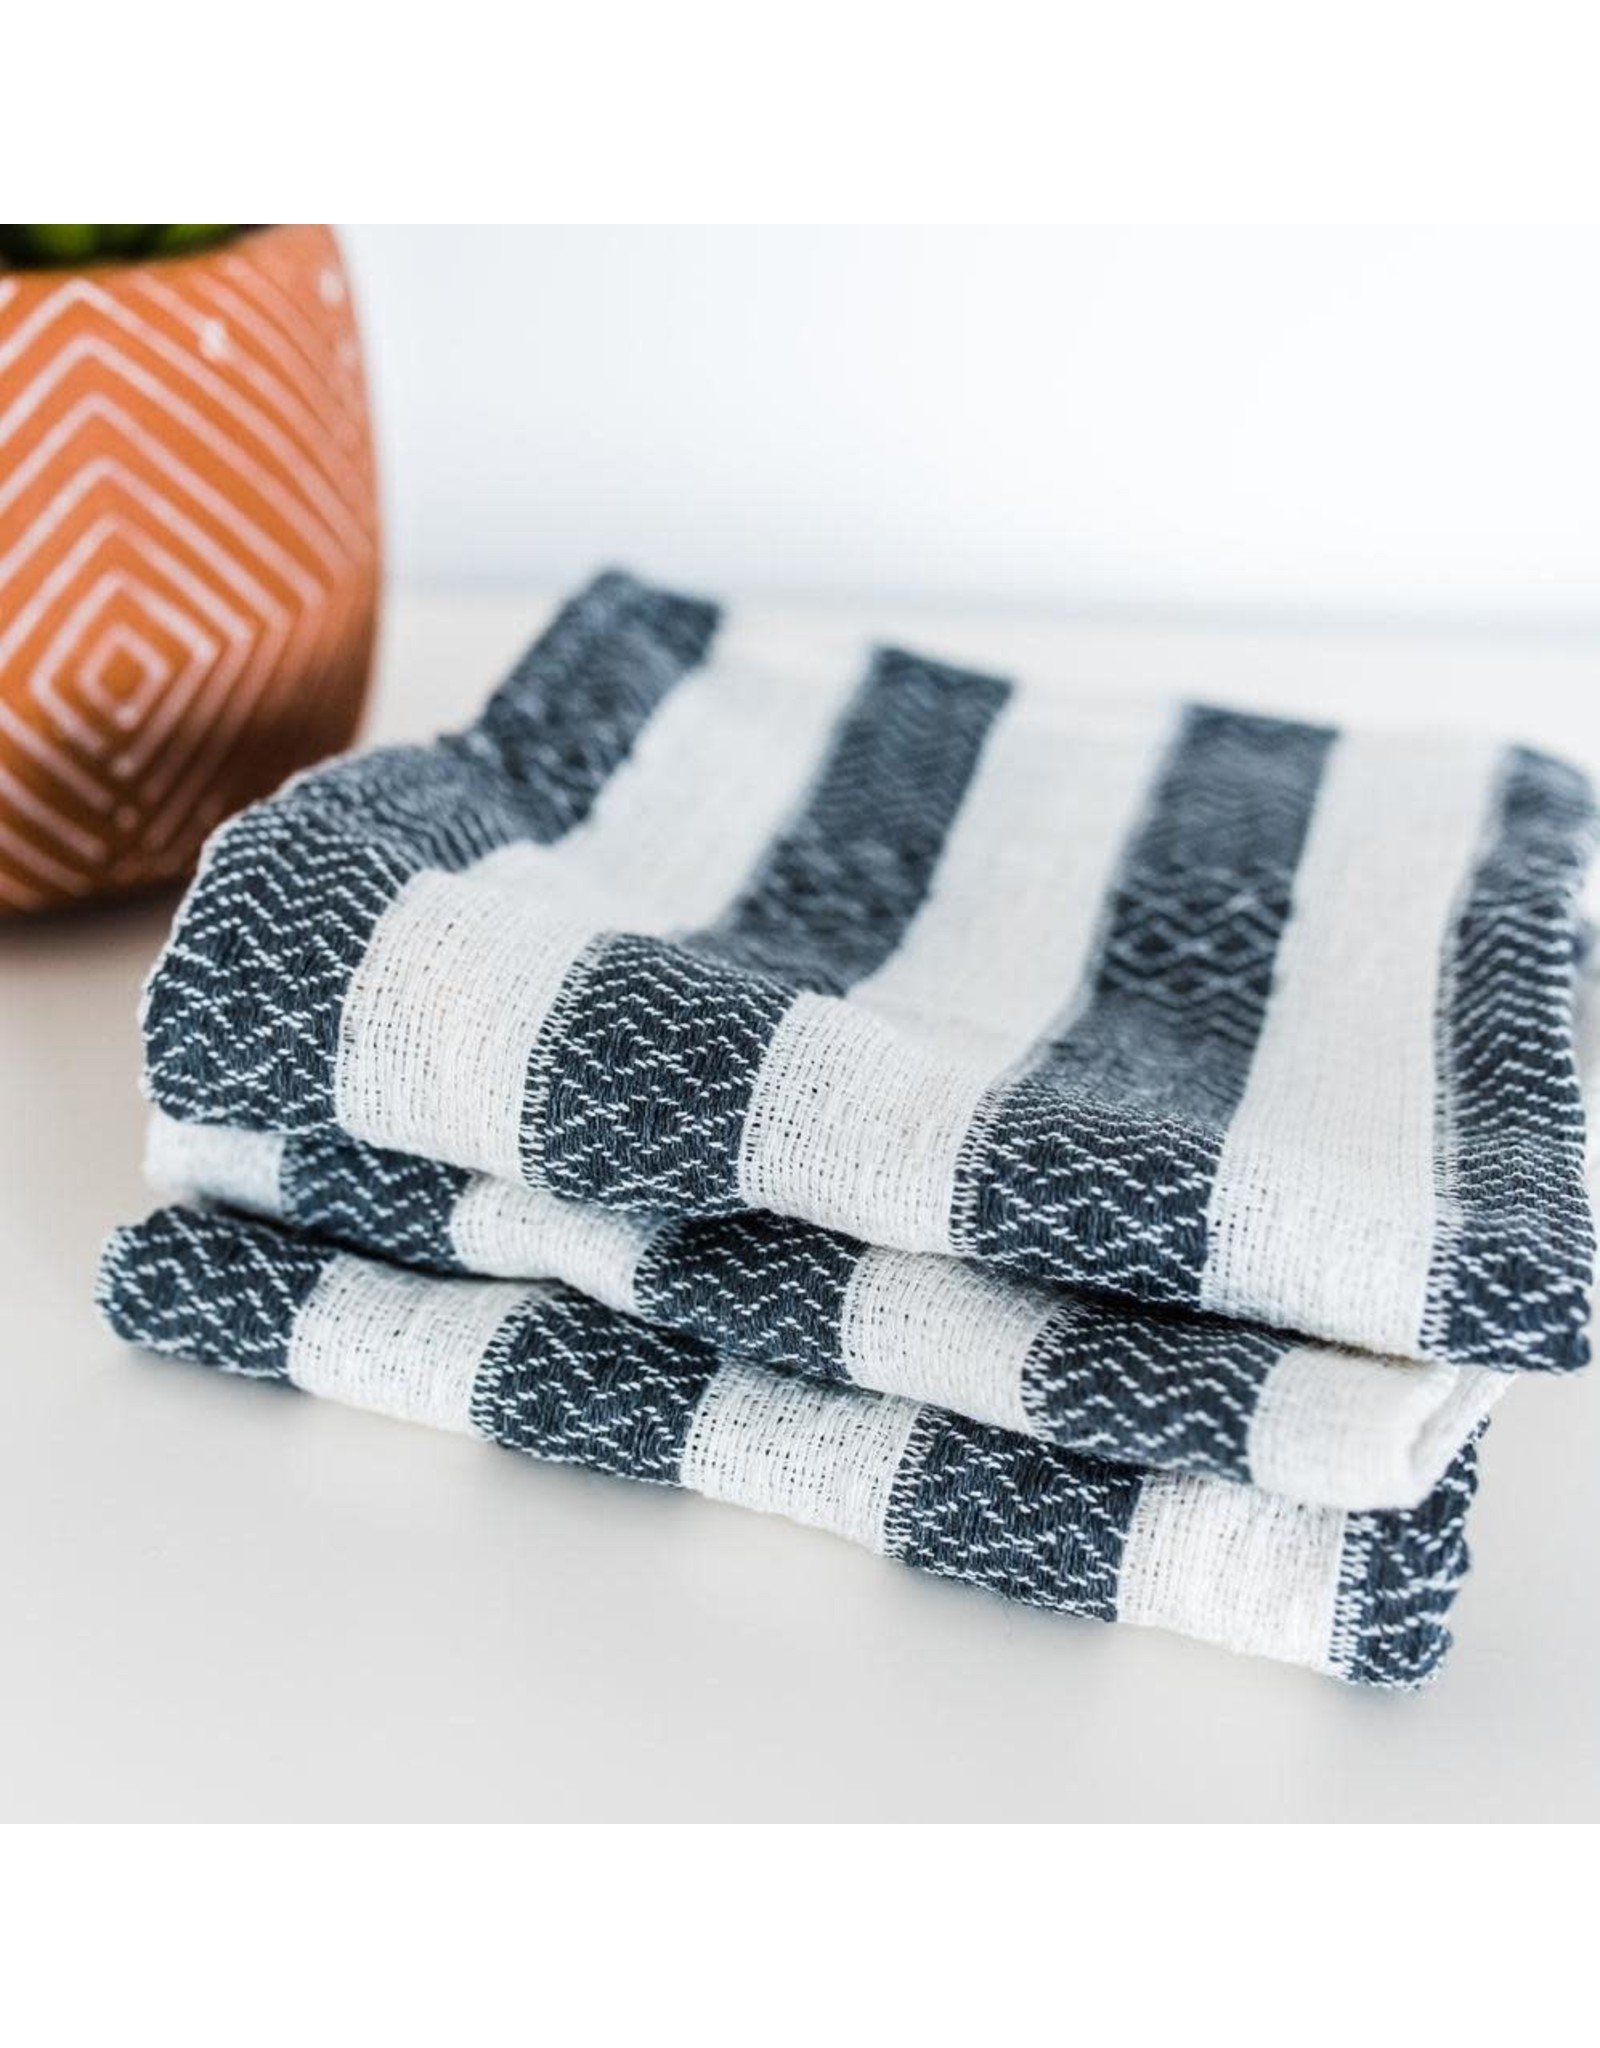 House of Jude Turkish Towels by House of Jude